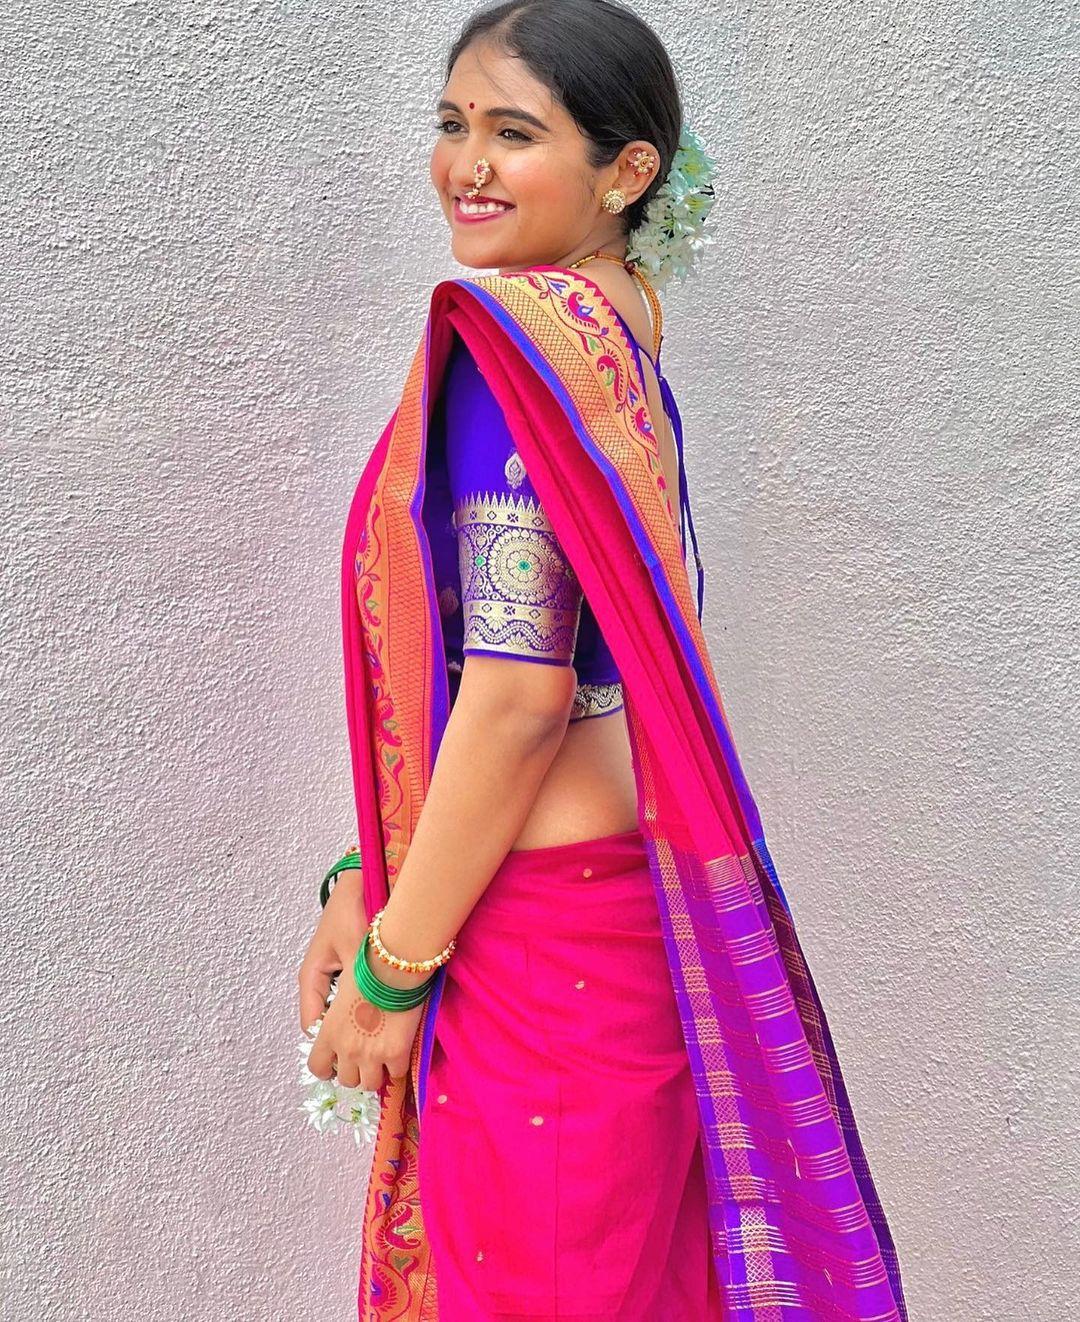 The actress paired her pink saree with a contrasting blue blouse. She wore stunning intricate golden jewellery, enhancing her look. To maintain the authentic traditional look, she tied her hair in a chic bun and decorated it with a stunning gajra